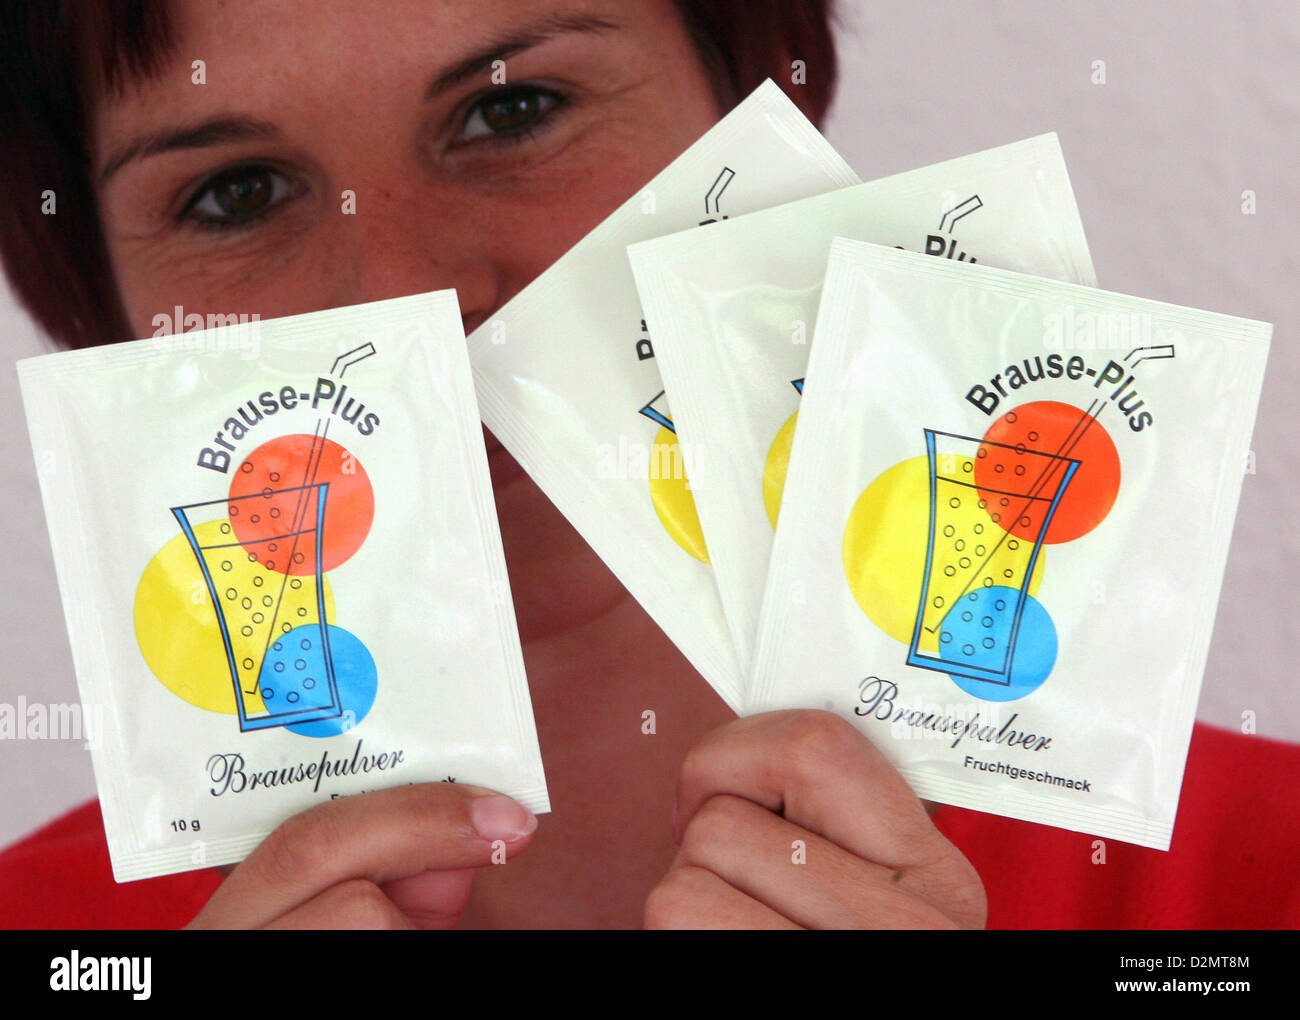 Kerstin Ranke shows bags of sherbet powder 'Brause-Plus' in Leipzig, Germany, 02 May 2008. About one and a half years ago, she had the ida of reinventing the sherbet powder of the GDR. After experimenting in her own kitchen with recipes and the help of food laboratories, she now introduced the powder with fruit taste in packages of 4x10 grams as a Ostalgie product. 'Ostalgie' is a term describing a special kind of nostalgia of Eastern Germans for the everyday life in the former GDR. Ranke is the owner of a shop of East German products and hopes that people want to reminisce the taste of the sh Stock Photo